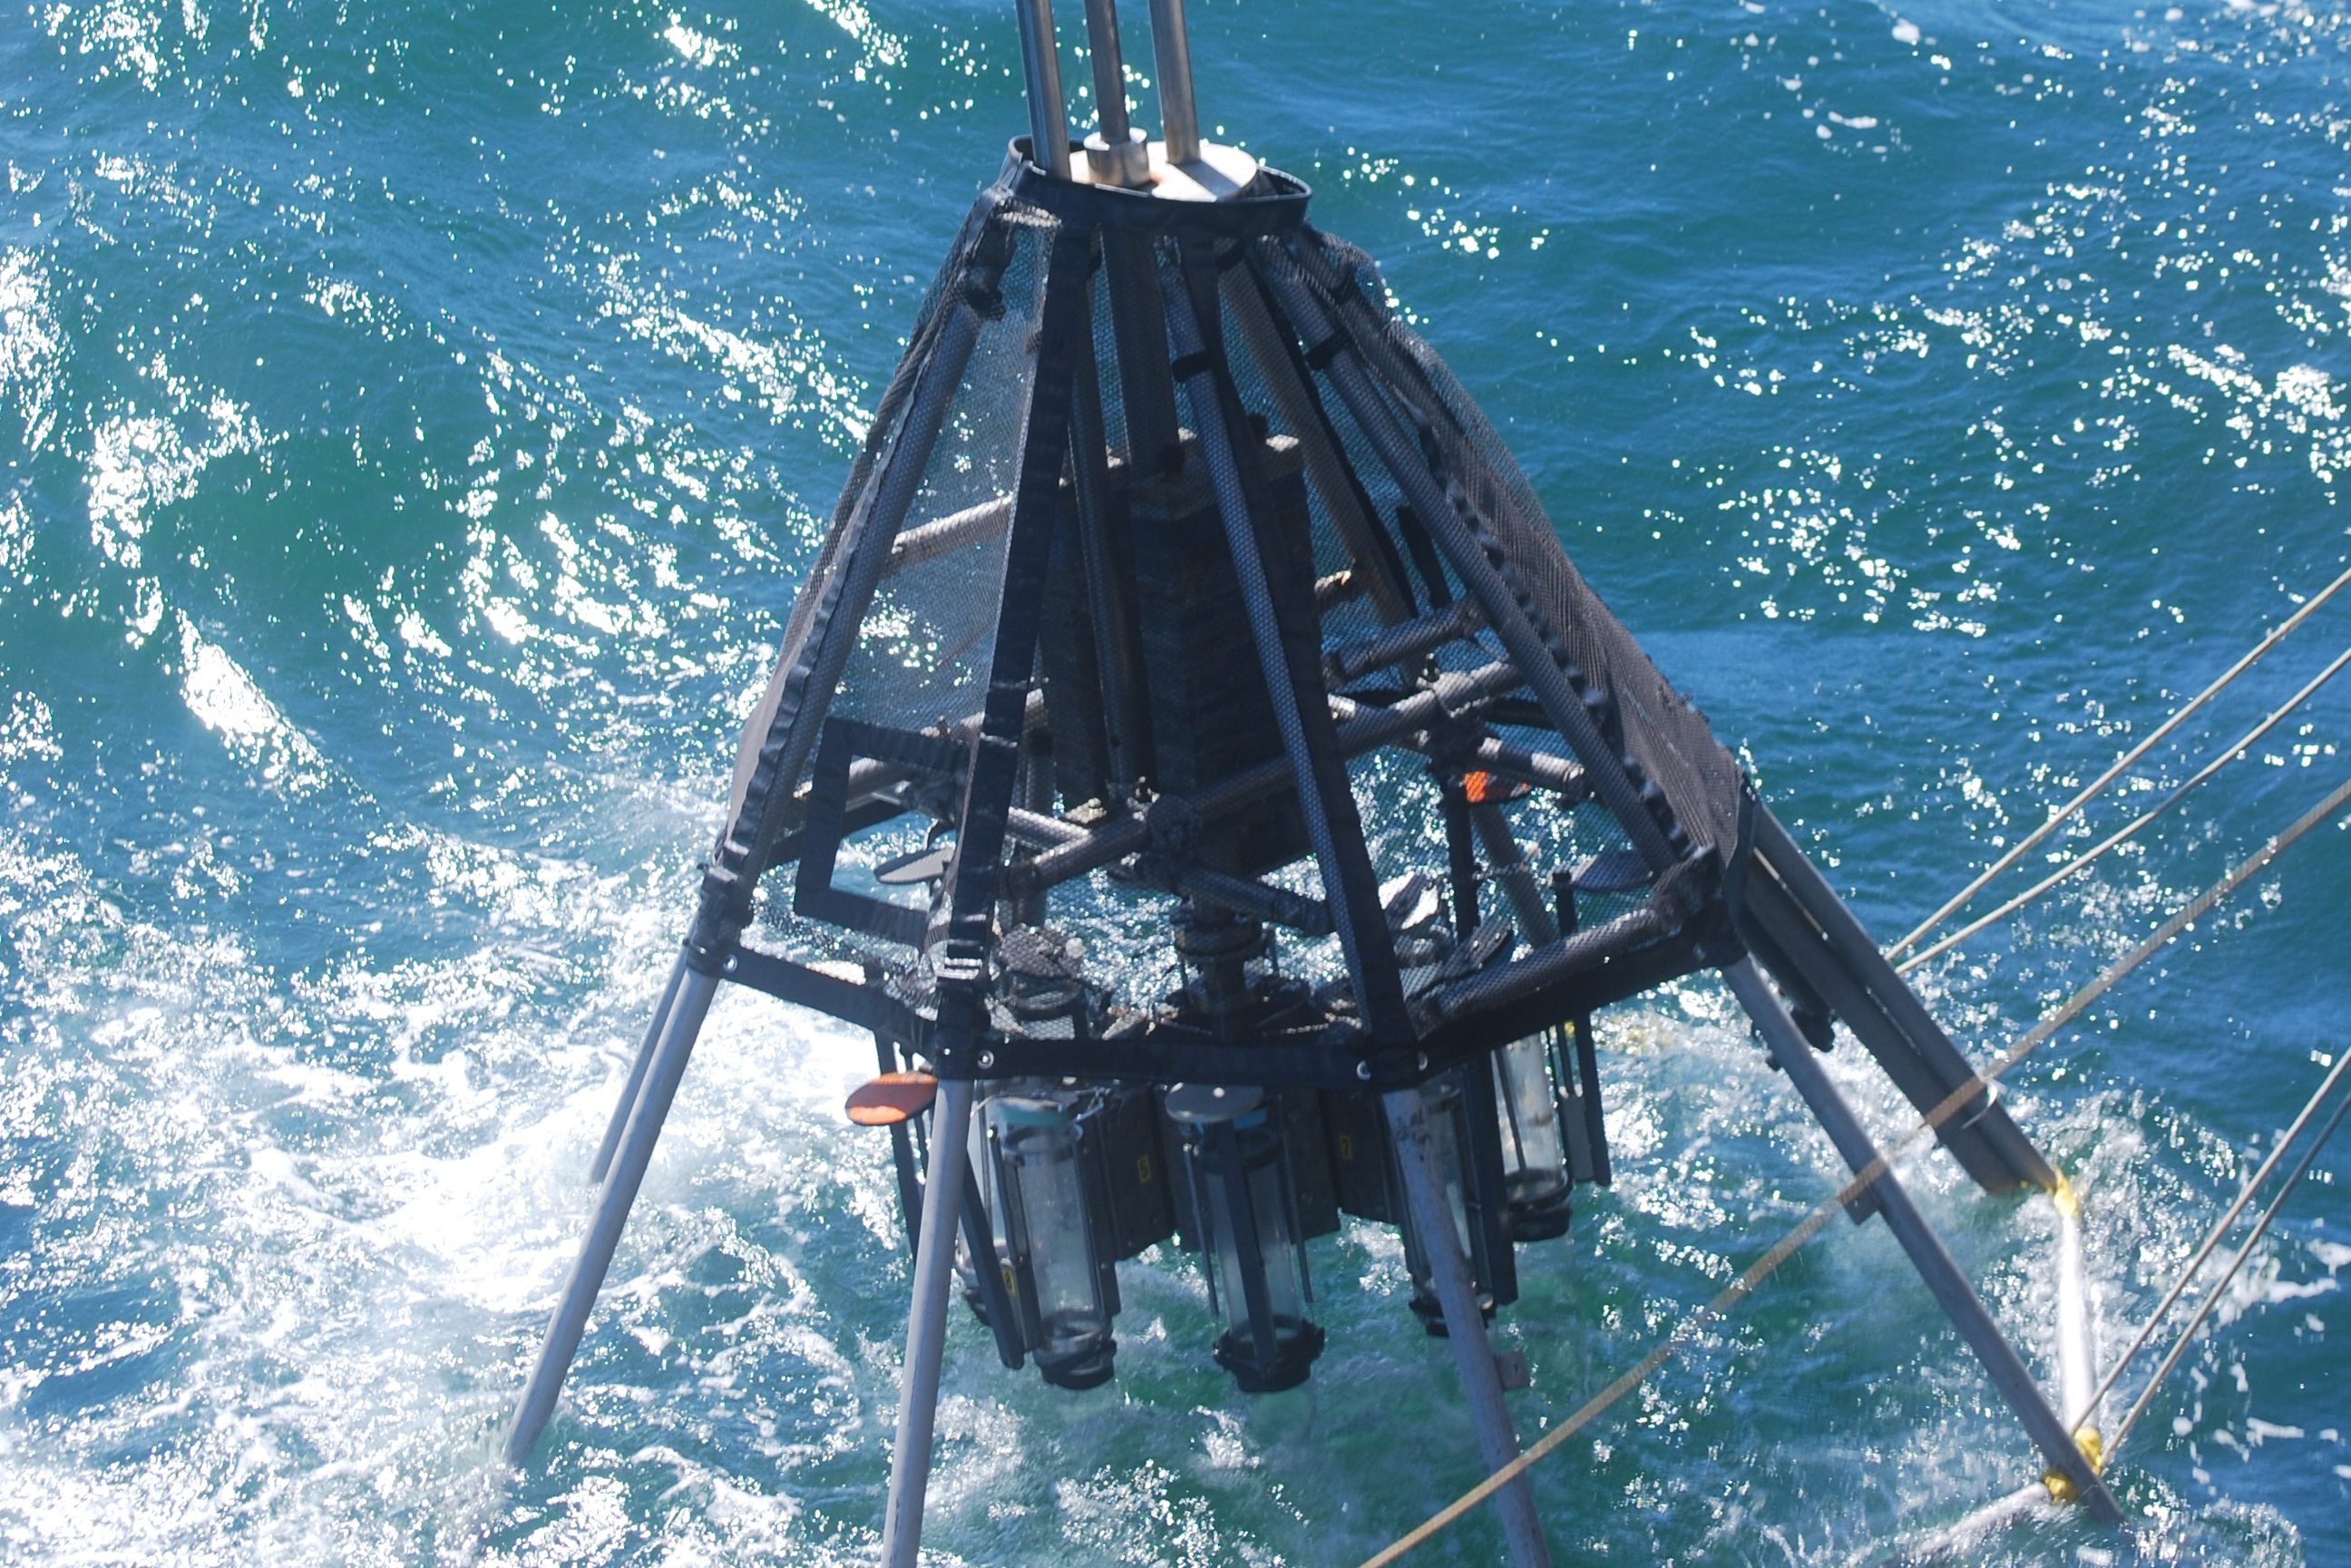 The multicore is a teepee like structure with a strong frame surrounding 8 to 12 individual cores. In this image the multicore is just touching the water as it is deployed.